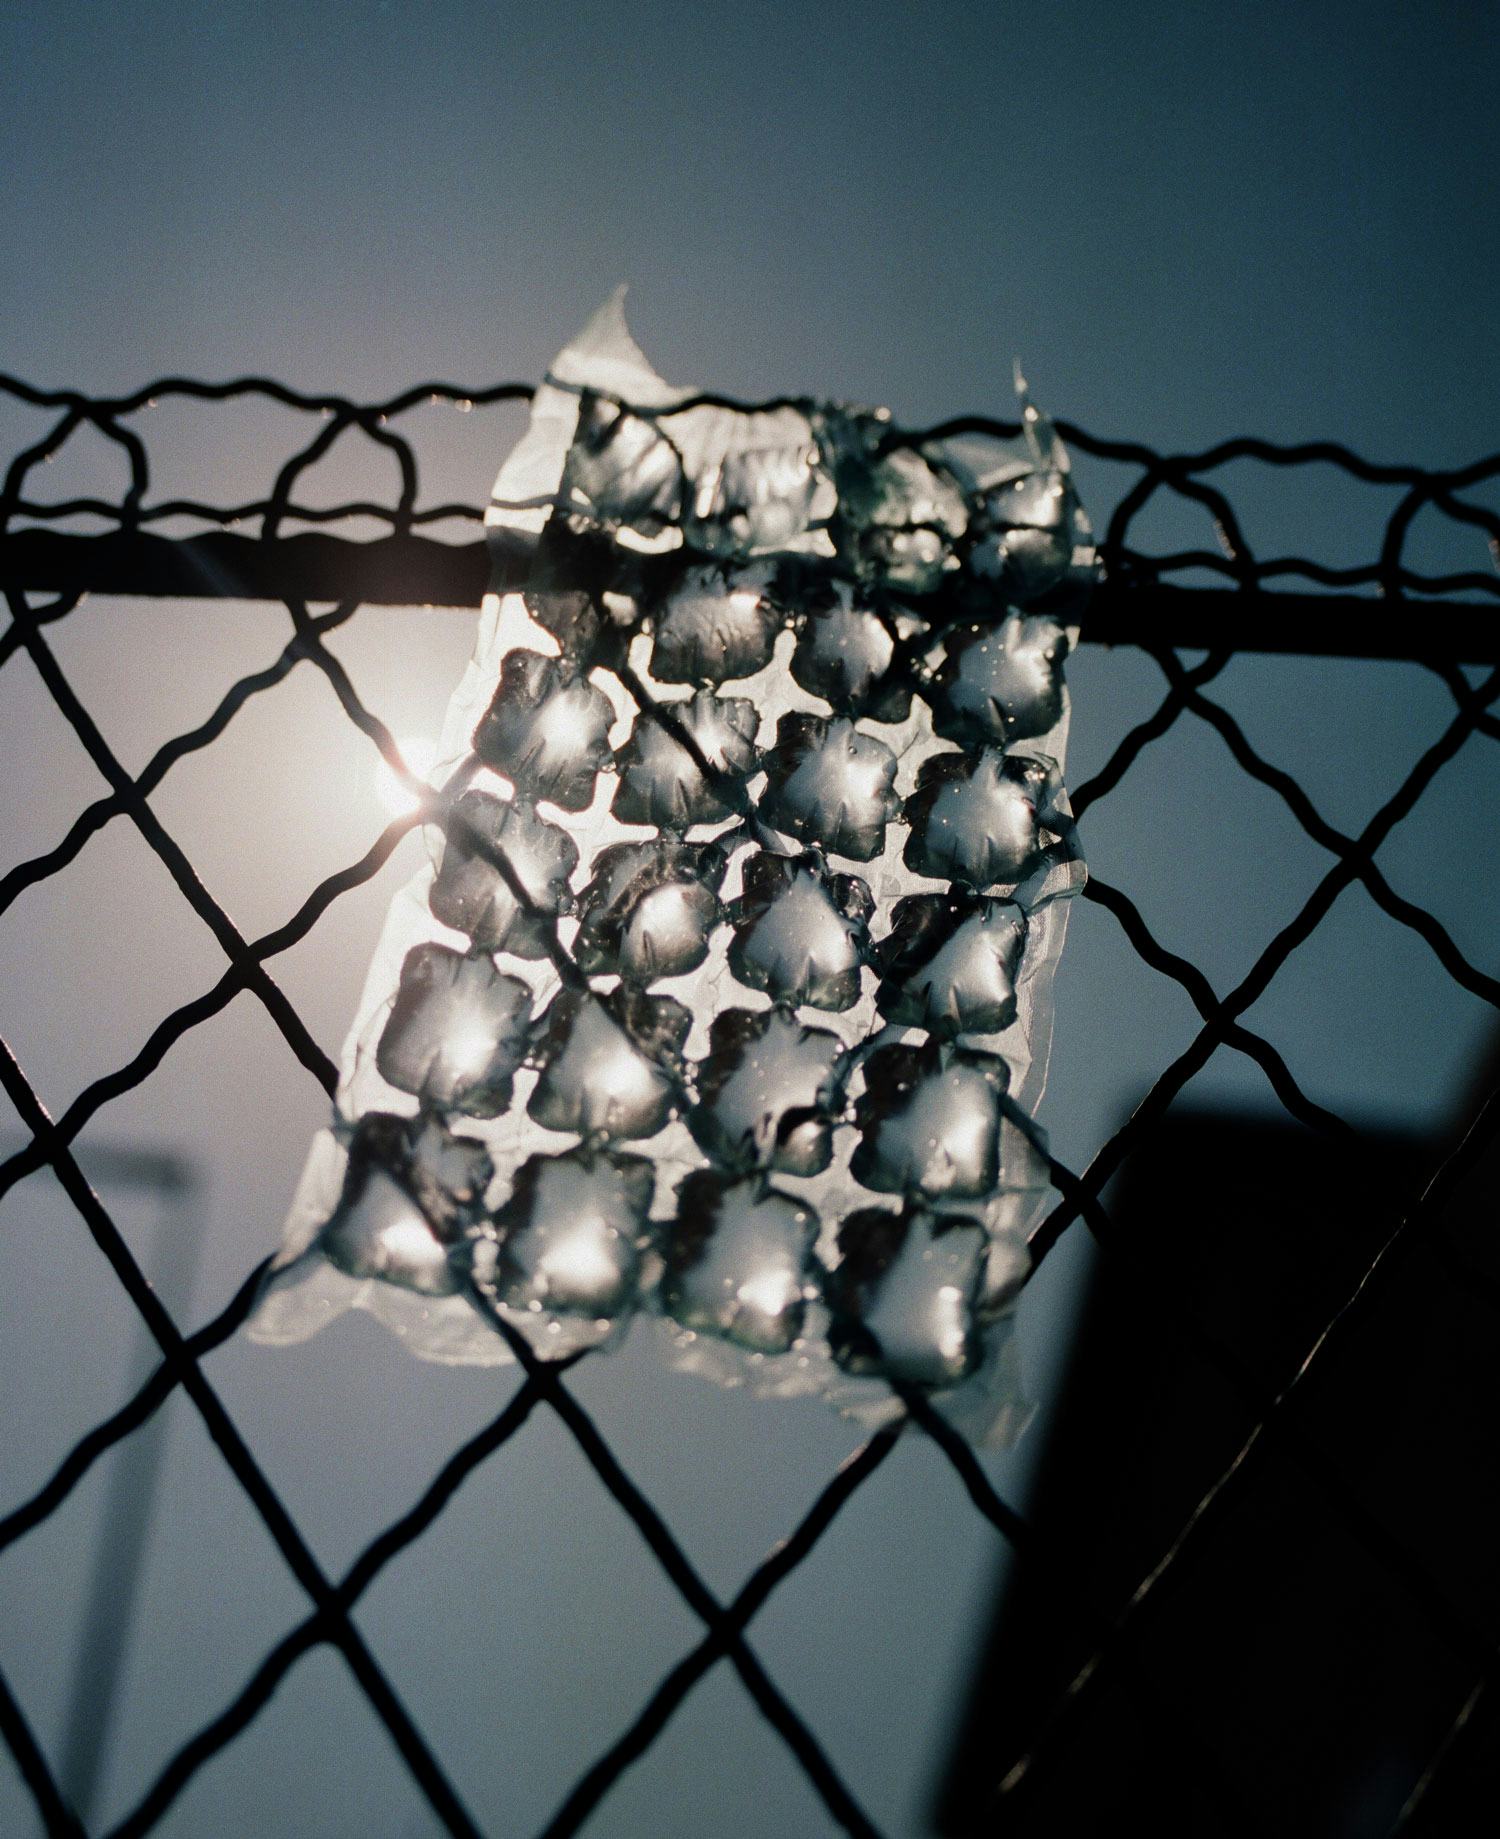 Photograph of barbed wire in the sun, with an ice pack